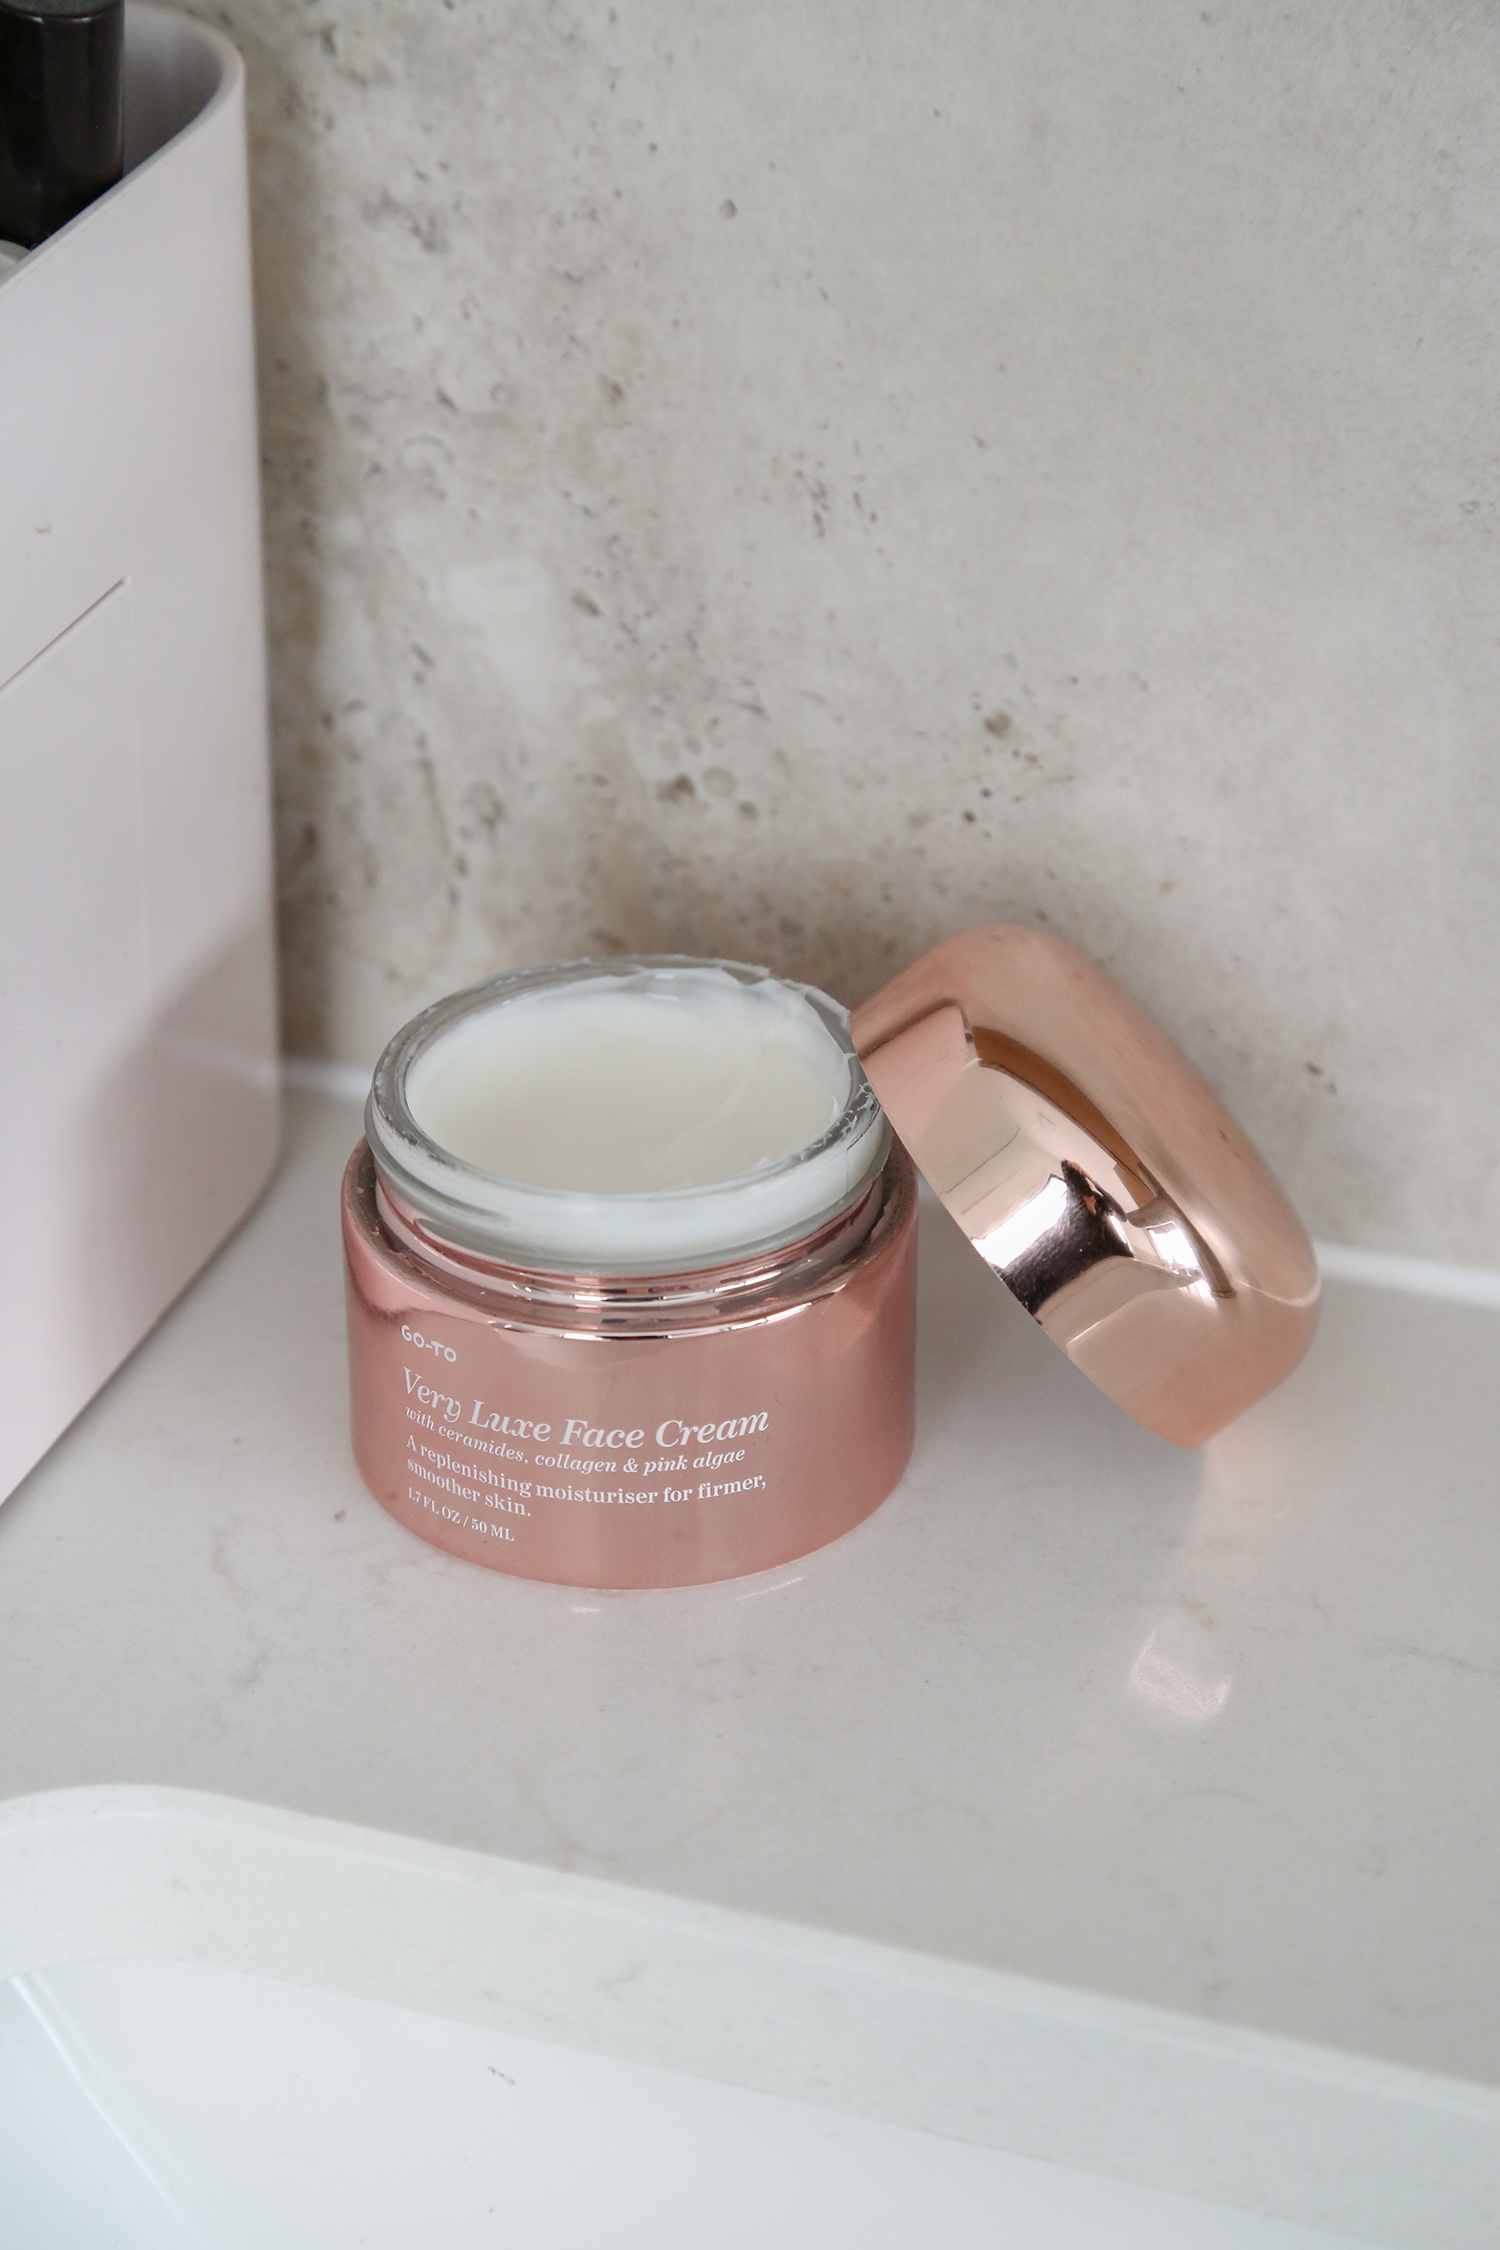 Go-To Very Luxe Face Cream Review